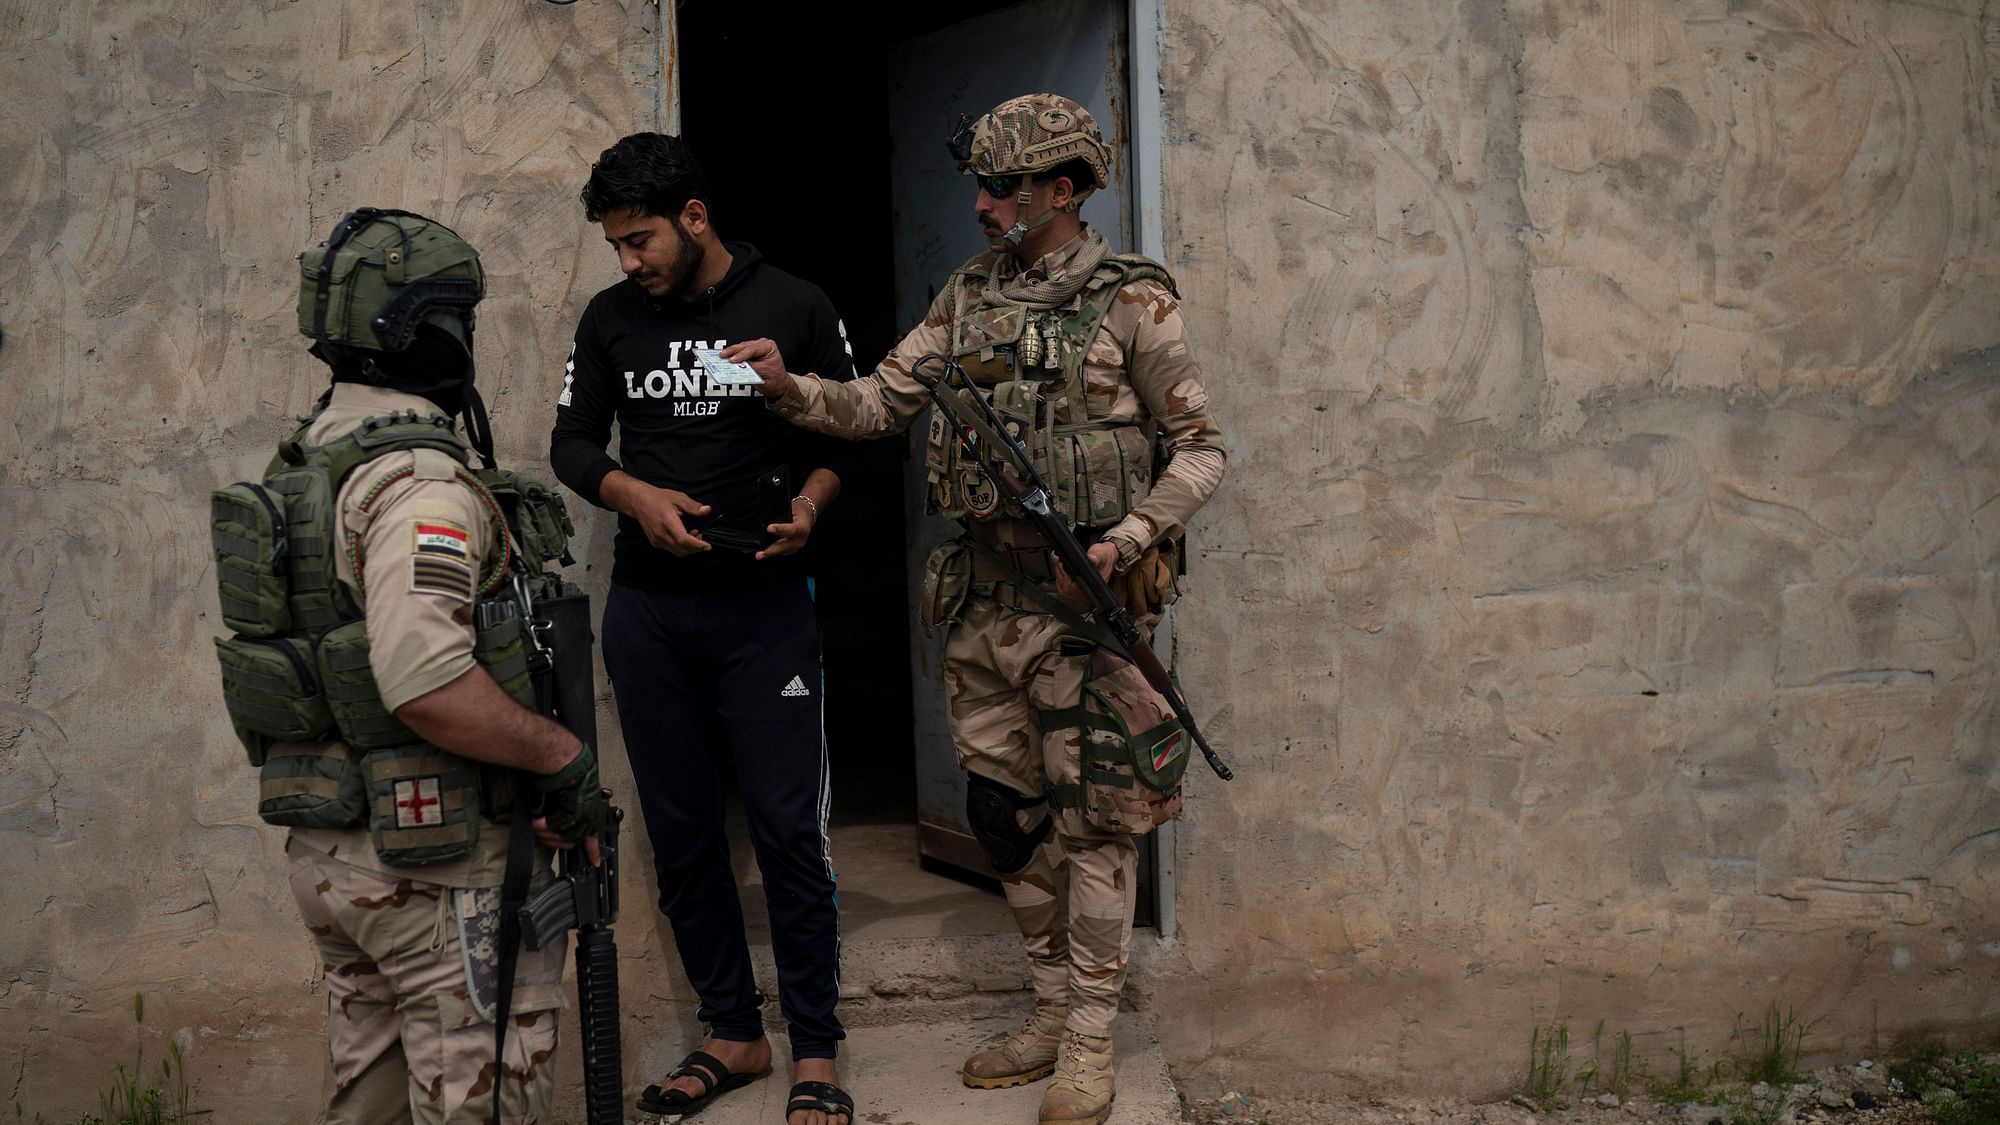 Iraqi army 20th division soldiers check the ID of a man during a raid in Badoush, Iraq.